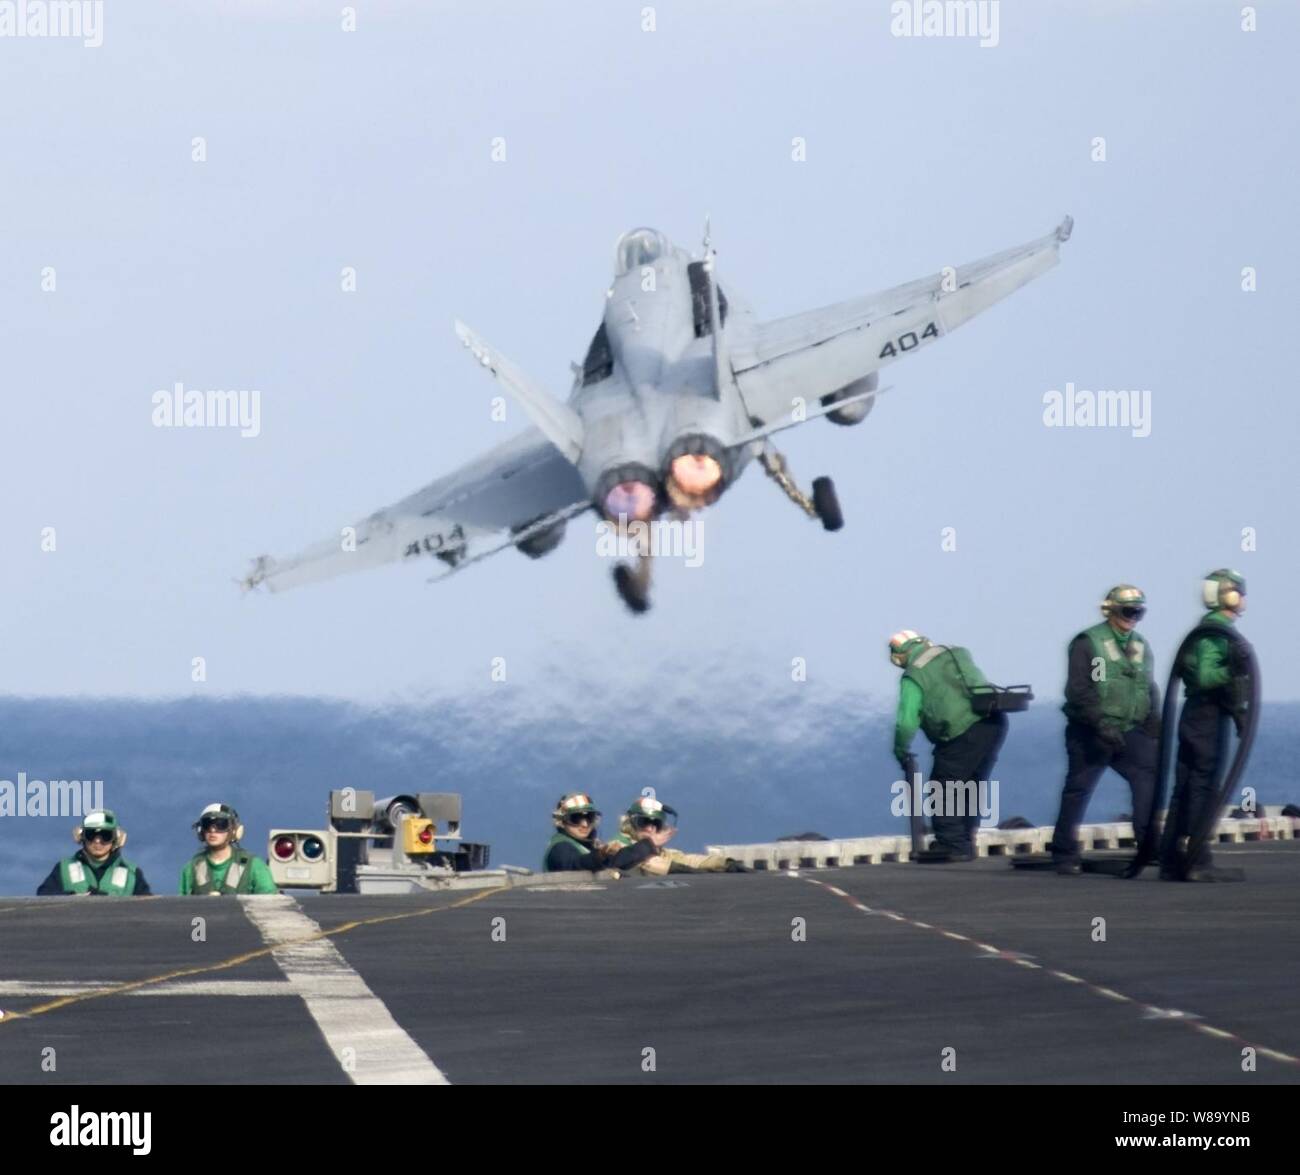 A U.S. Navy F/A-18C Hornet assigned to Strike Fighter squadron 25 launches from the flight deck of the aircraft carrier USS Carl Vinson (CVN 70) in the Pacific Ocean on Jan. 8, 2011.  The Carl Vinson and Carrier Air Wing 17 went on deployment to the U.S. 7th Fleet areas of responsibility. Stock Photo